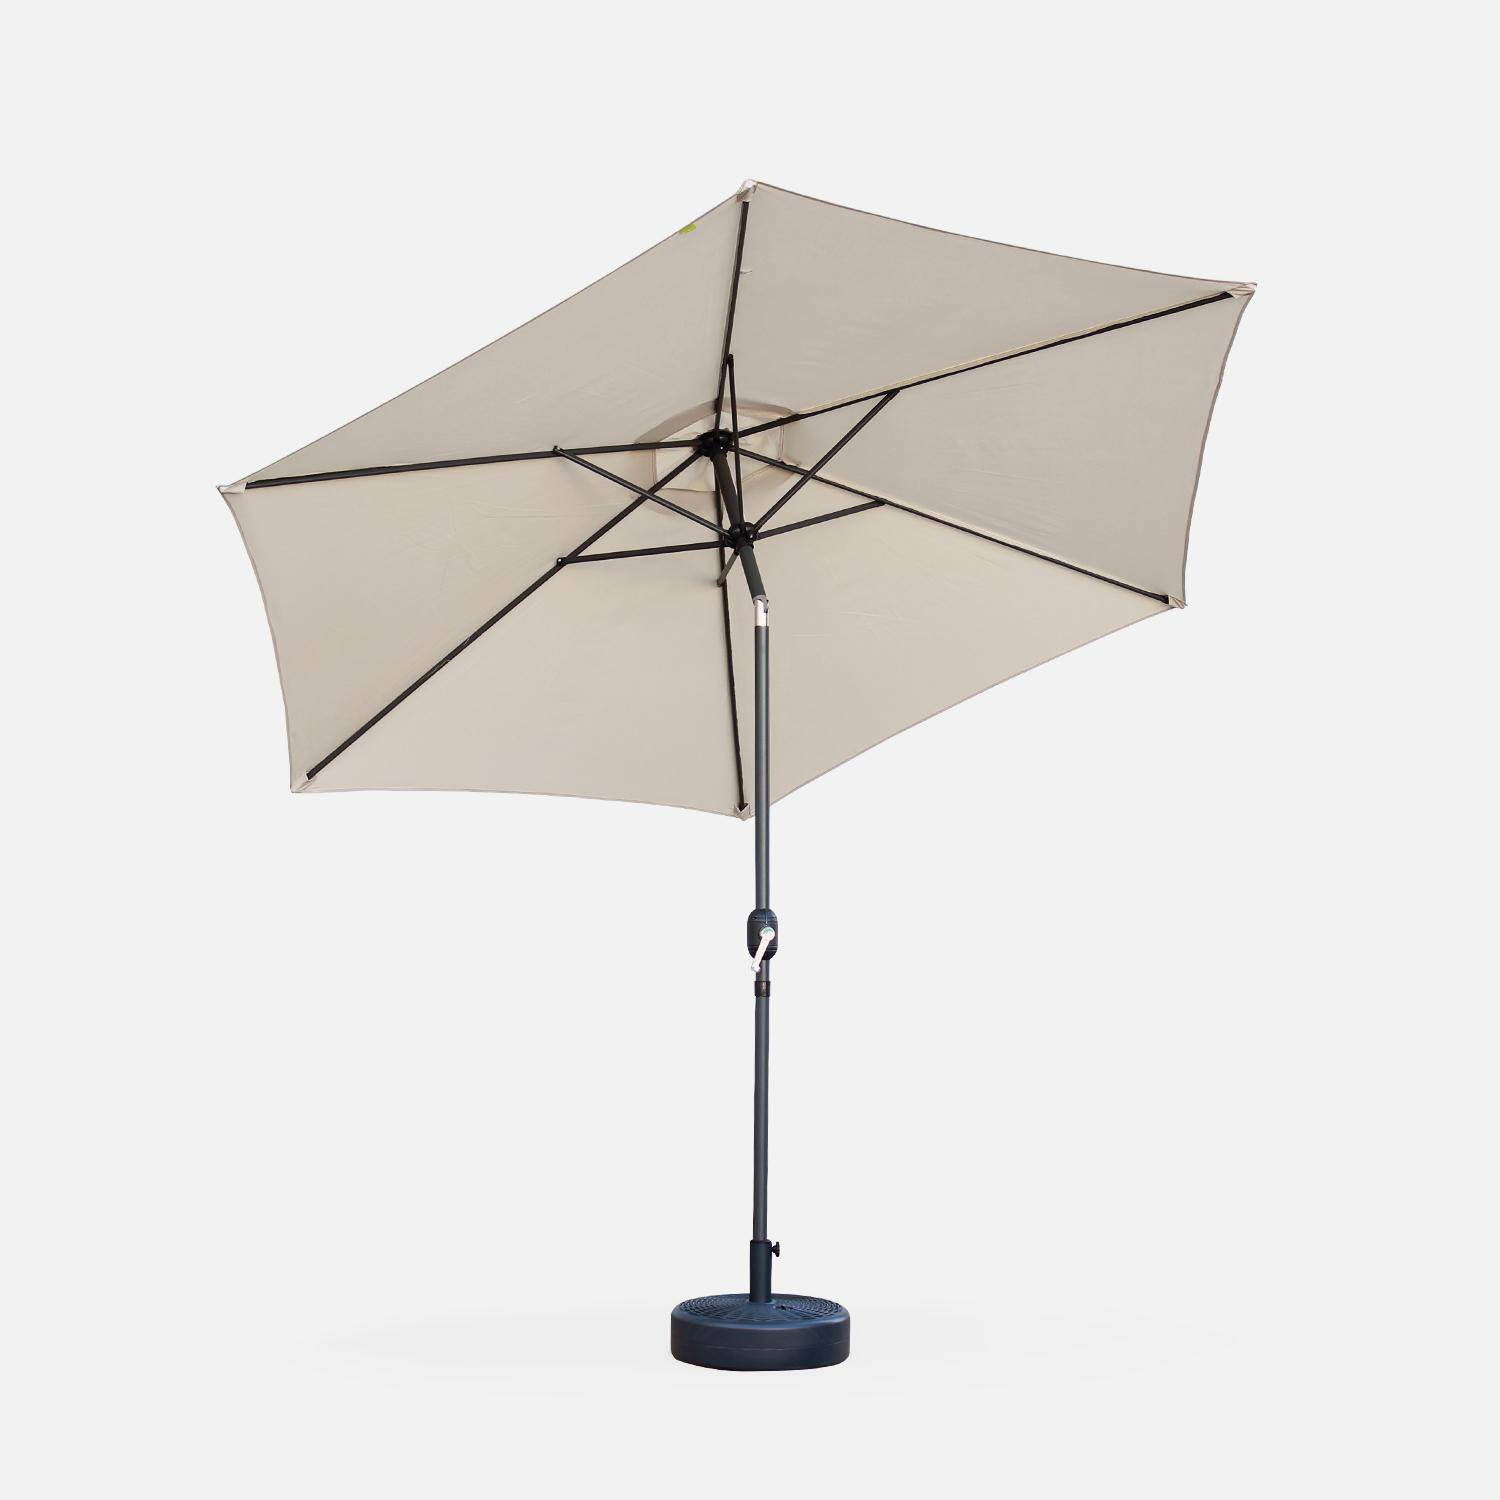 3m round centre pole parasol - adjustable aluminium central mast and crank handle opening - Touquet - Sand,sweeek,Photo4